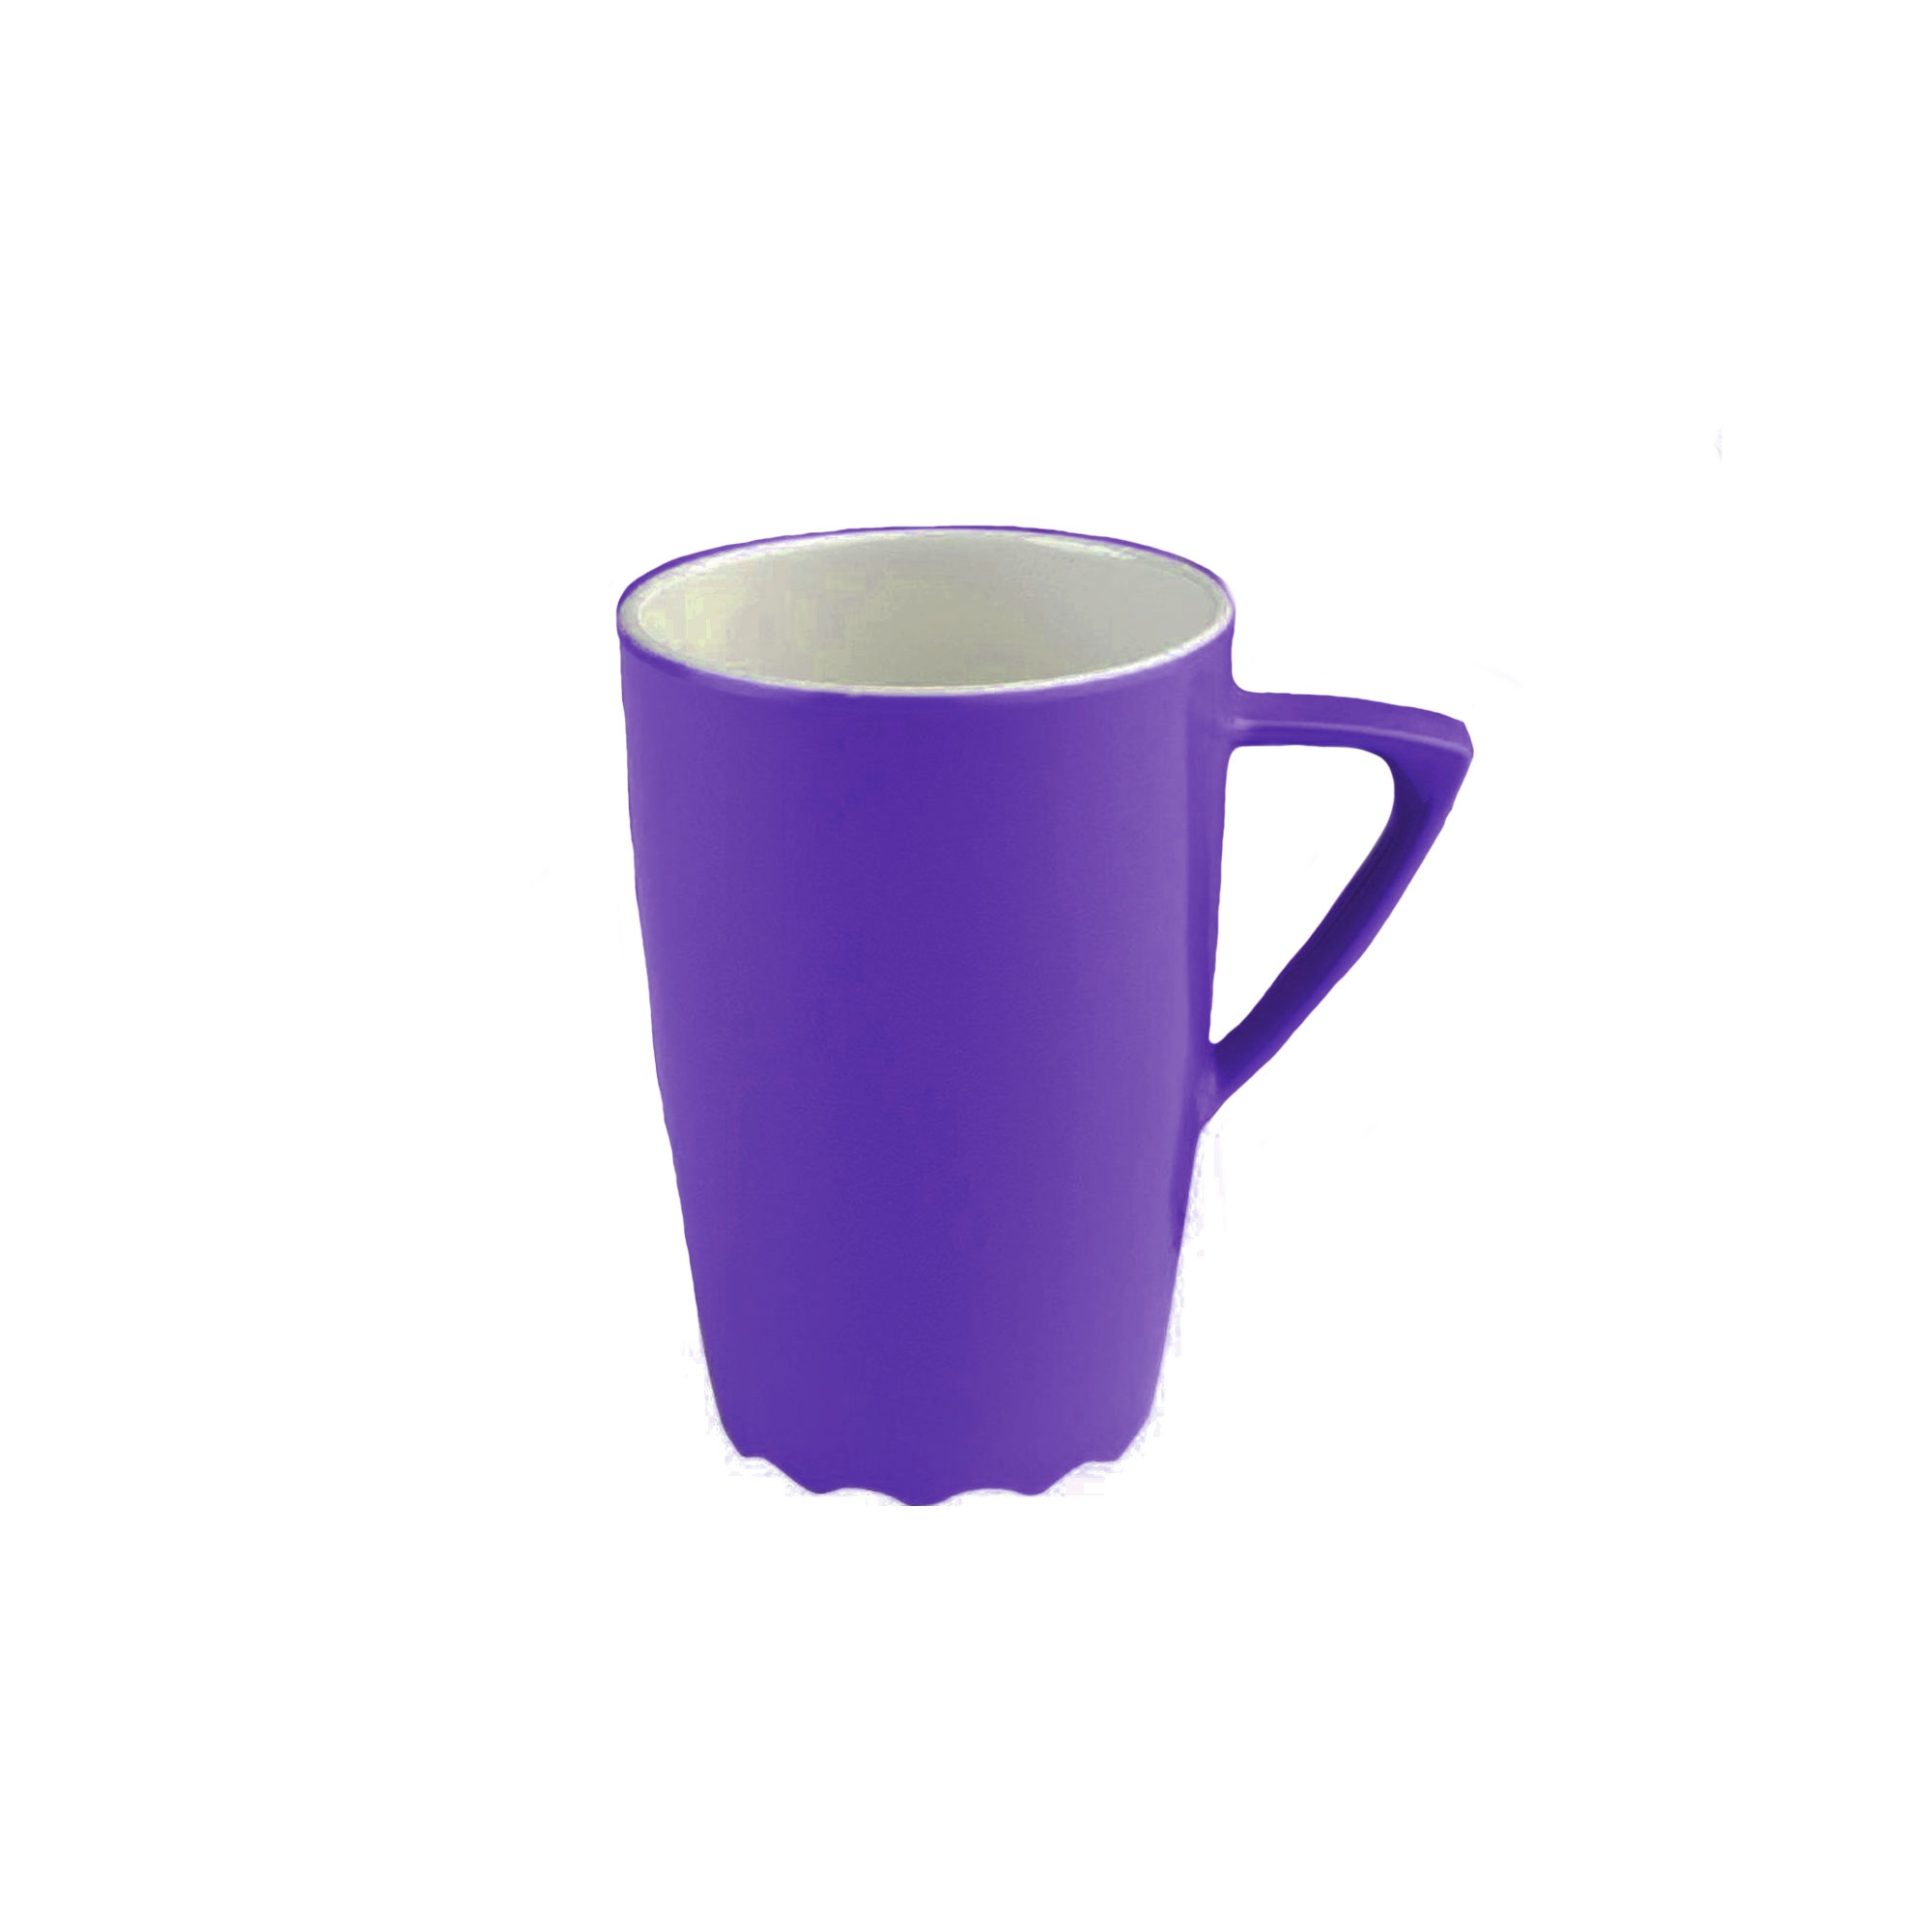 Mepal - Wave mug 200ml old series - different colors